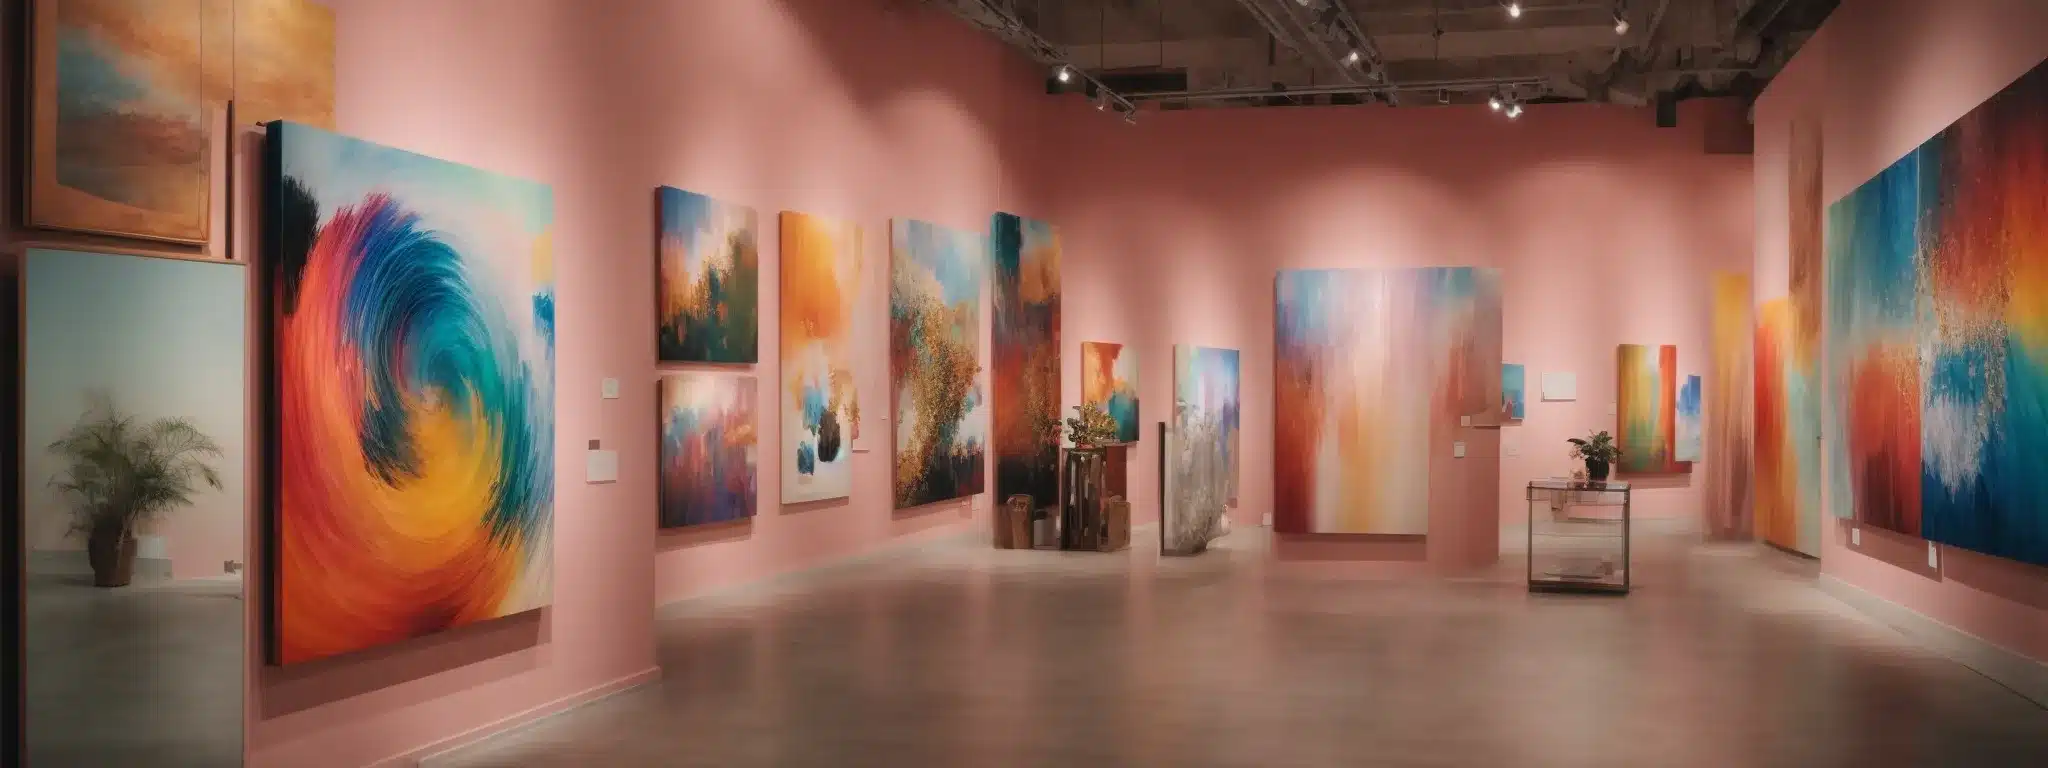 A Colorful Art Gallery Where Distinct Paintings Illustrate A Variety Of Unique Branding Strategies.